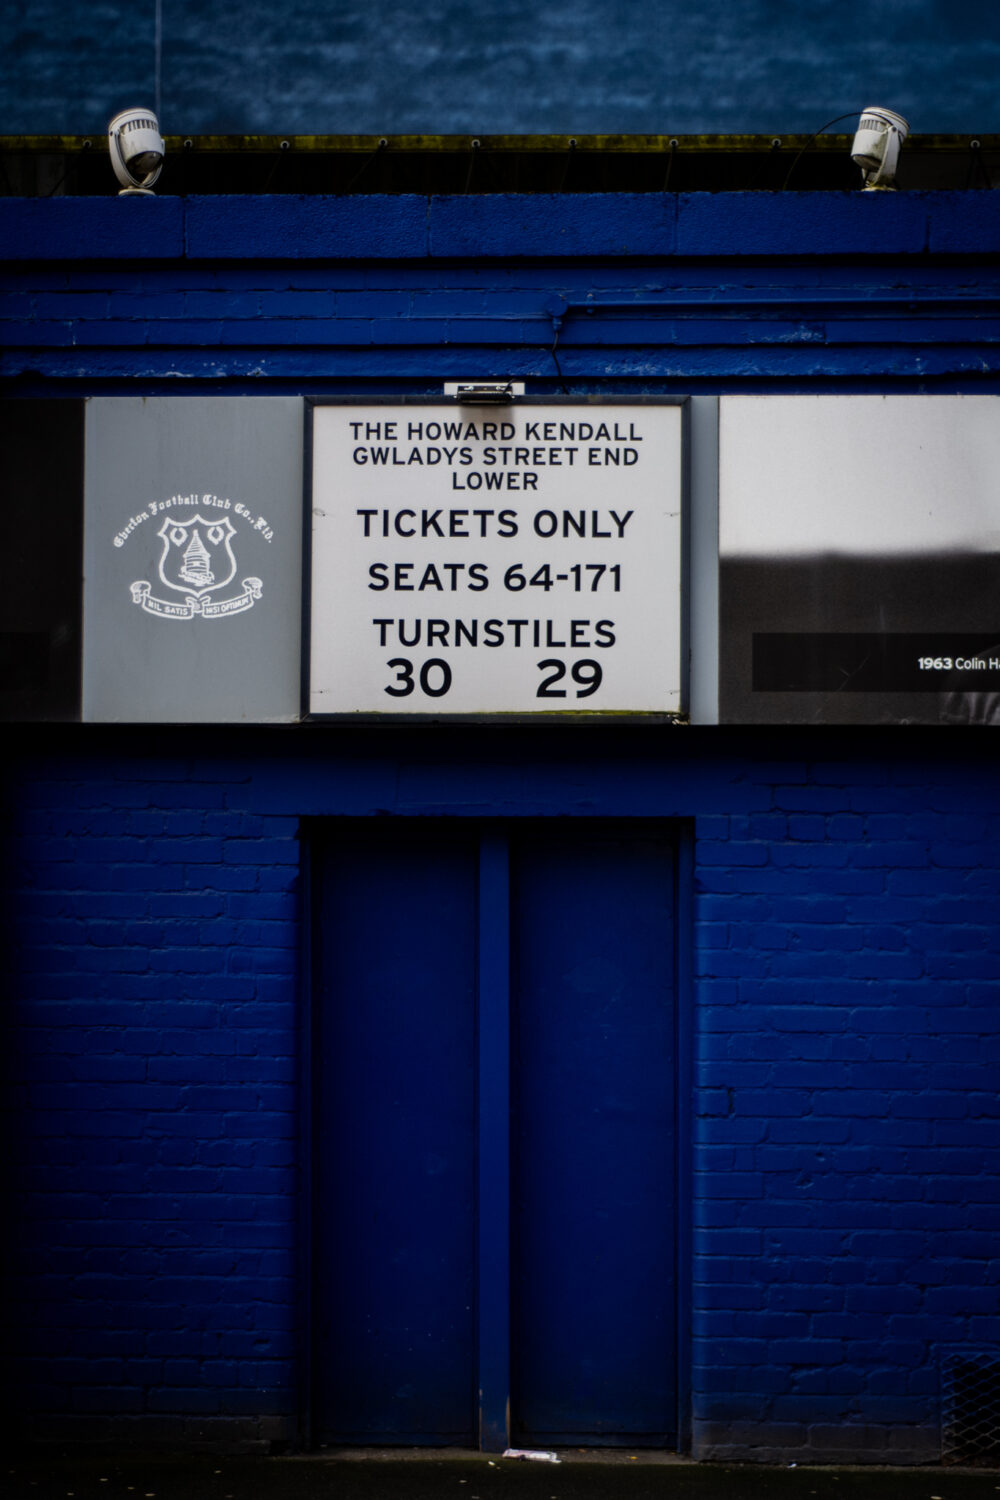 Blues fan photographs every turnstile at Goodison Park ahead of its final season